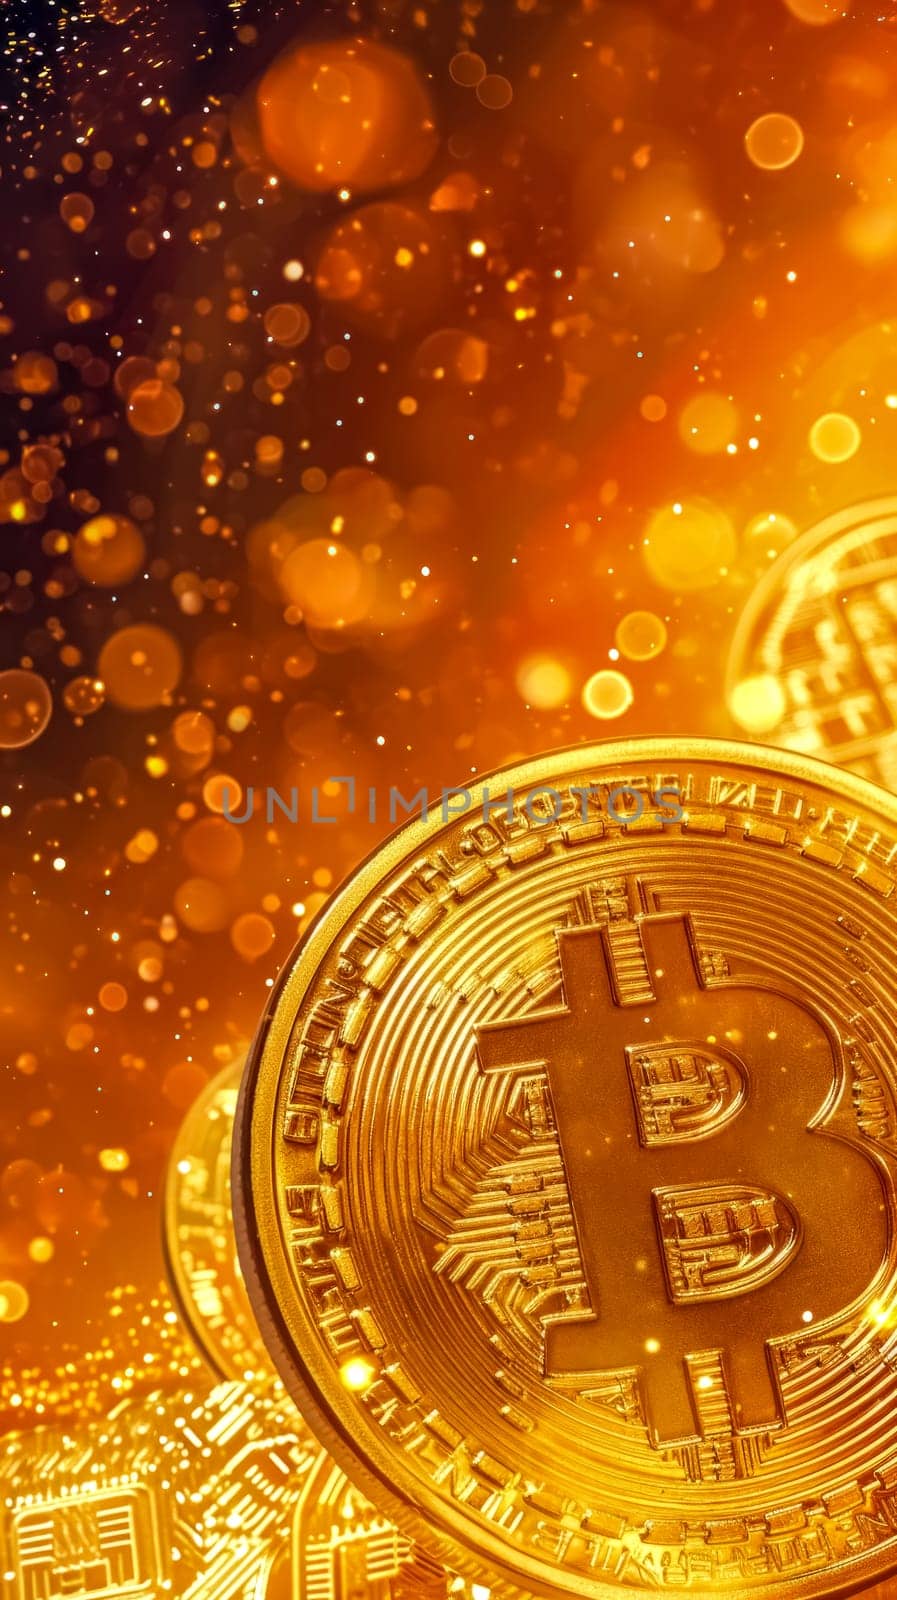 A gleaming Bitcoin coin against a vibrant backdrop of shimmering golden lights, embodying the dynamic and electrifying world of cryptocurrency investment and digital finance by Edophoto